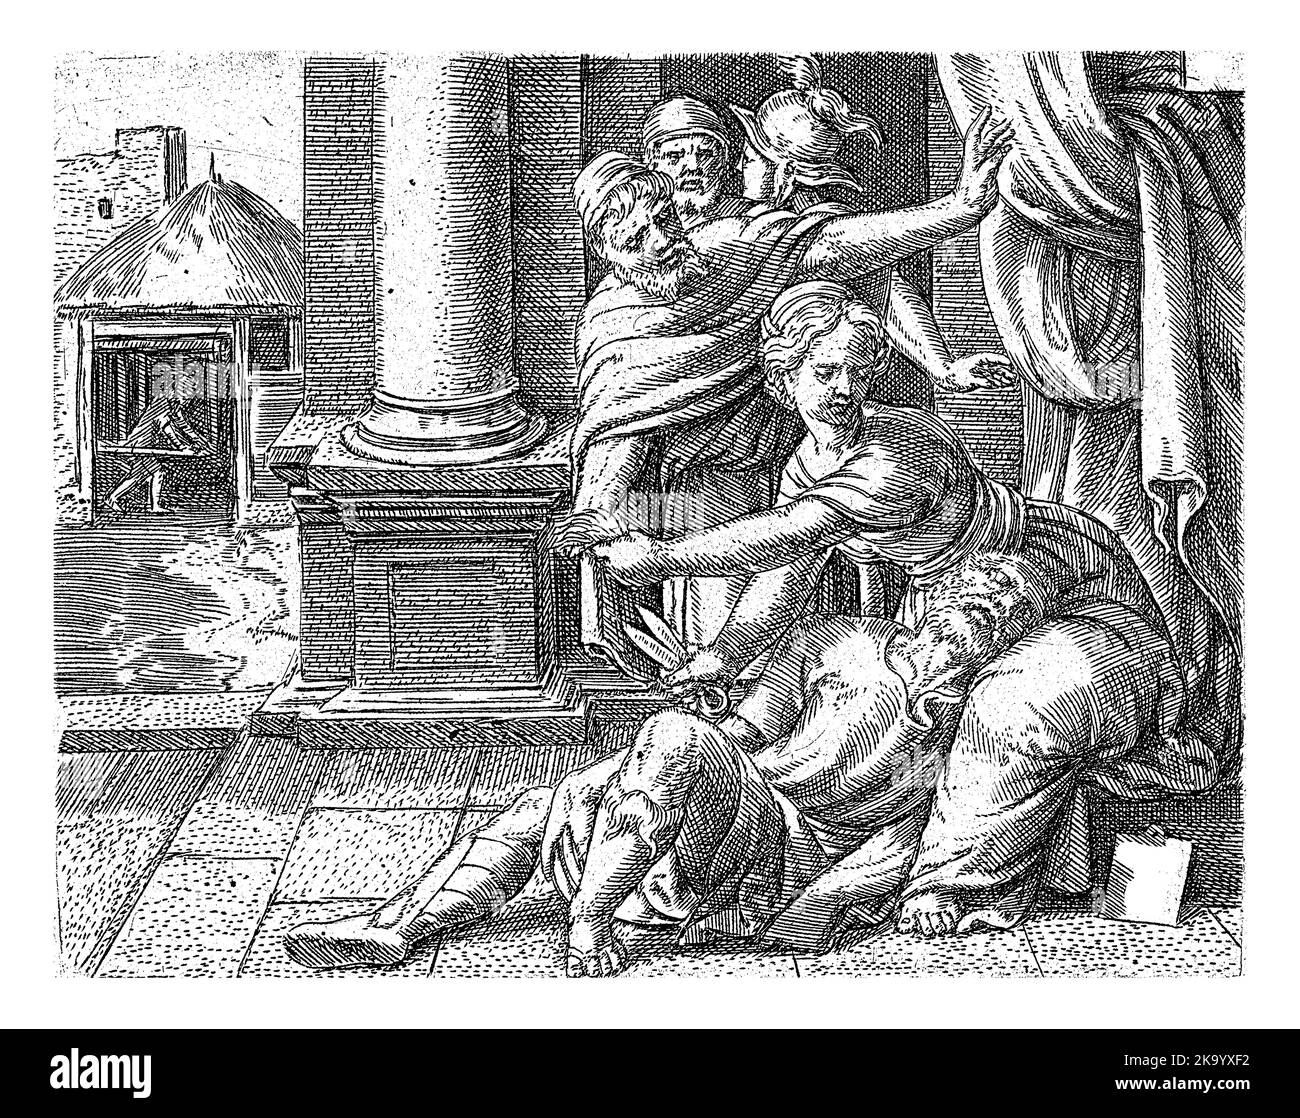 Samson and Delilah, Cornelis Massijs, 1549 Samson is sleeping with his head on Delilah's lap, while she cuts his hair. Three Philistines are ready to Stock Photo